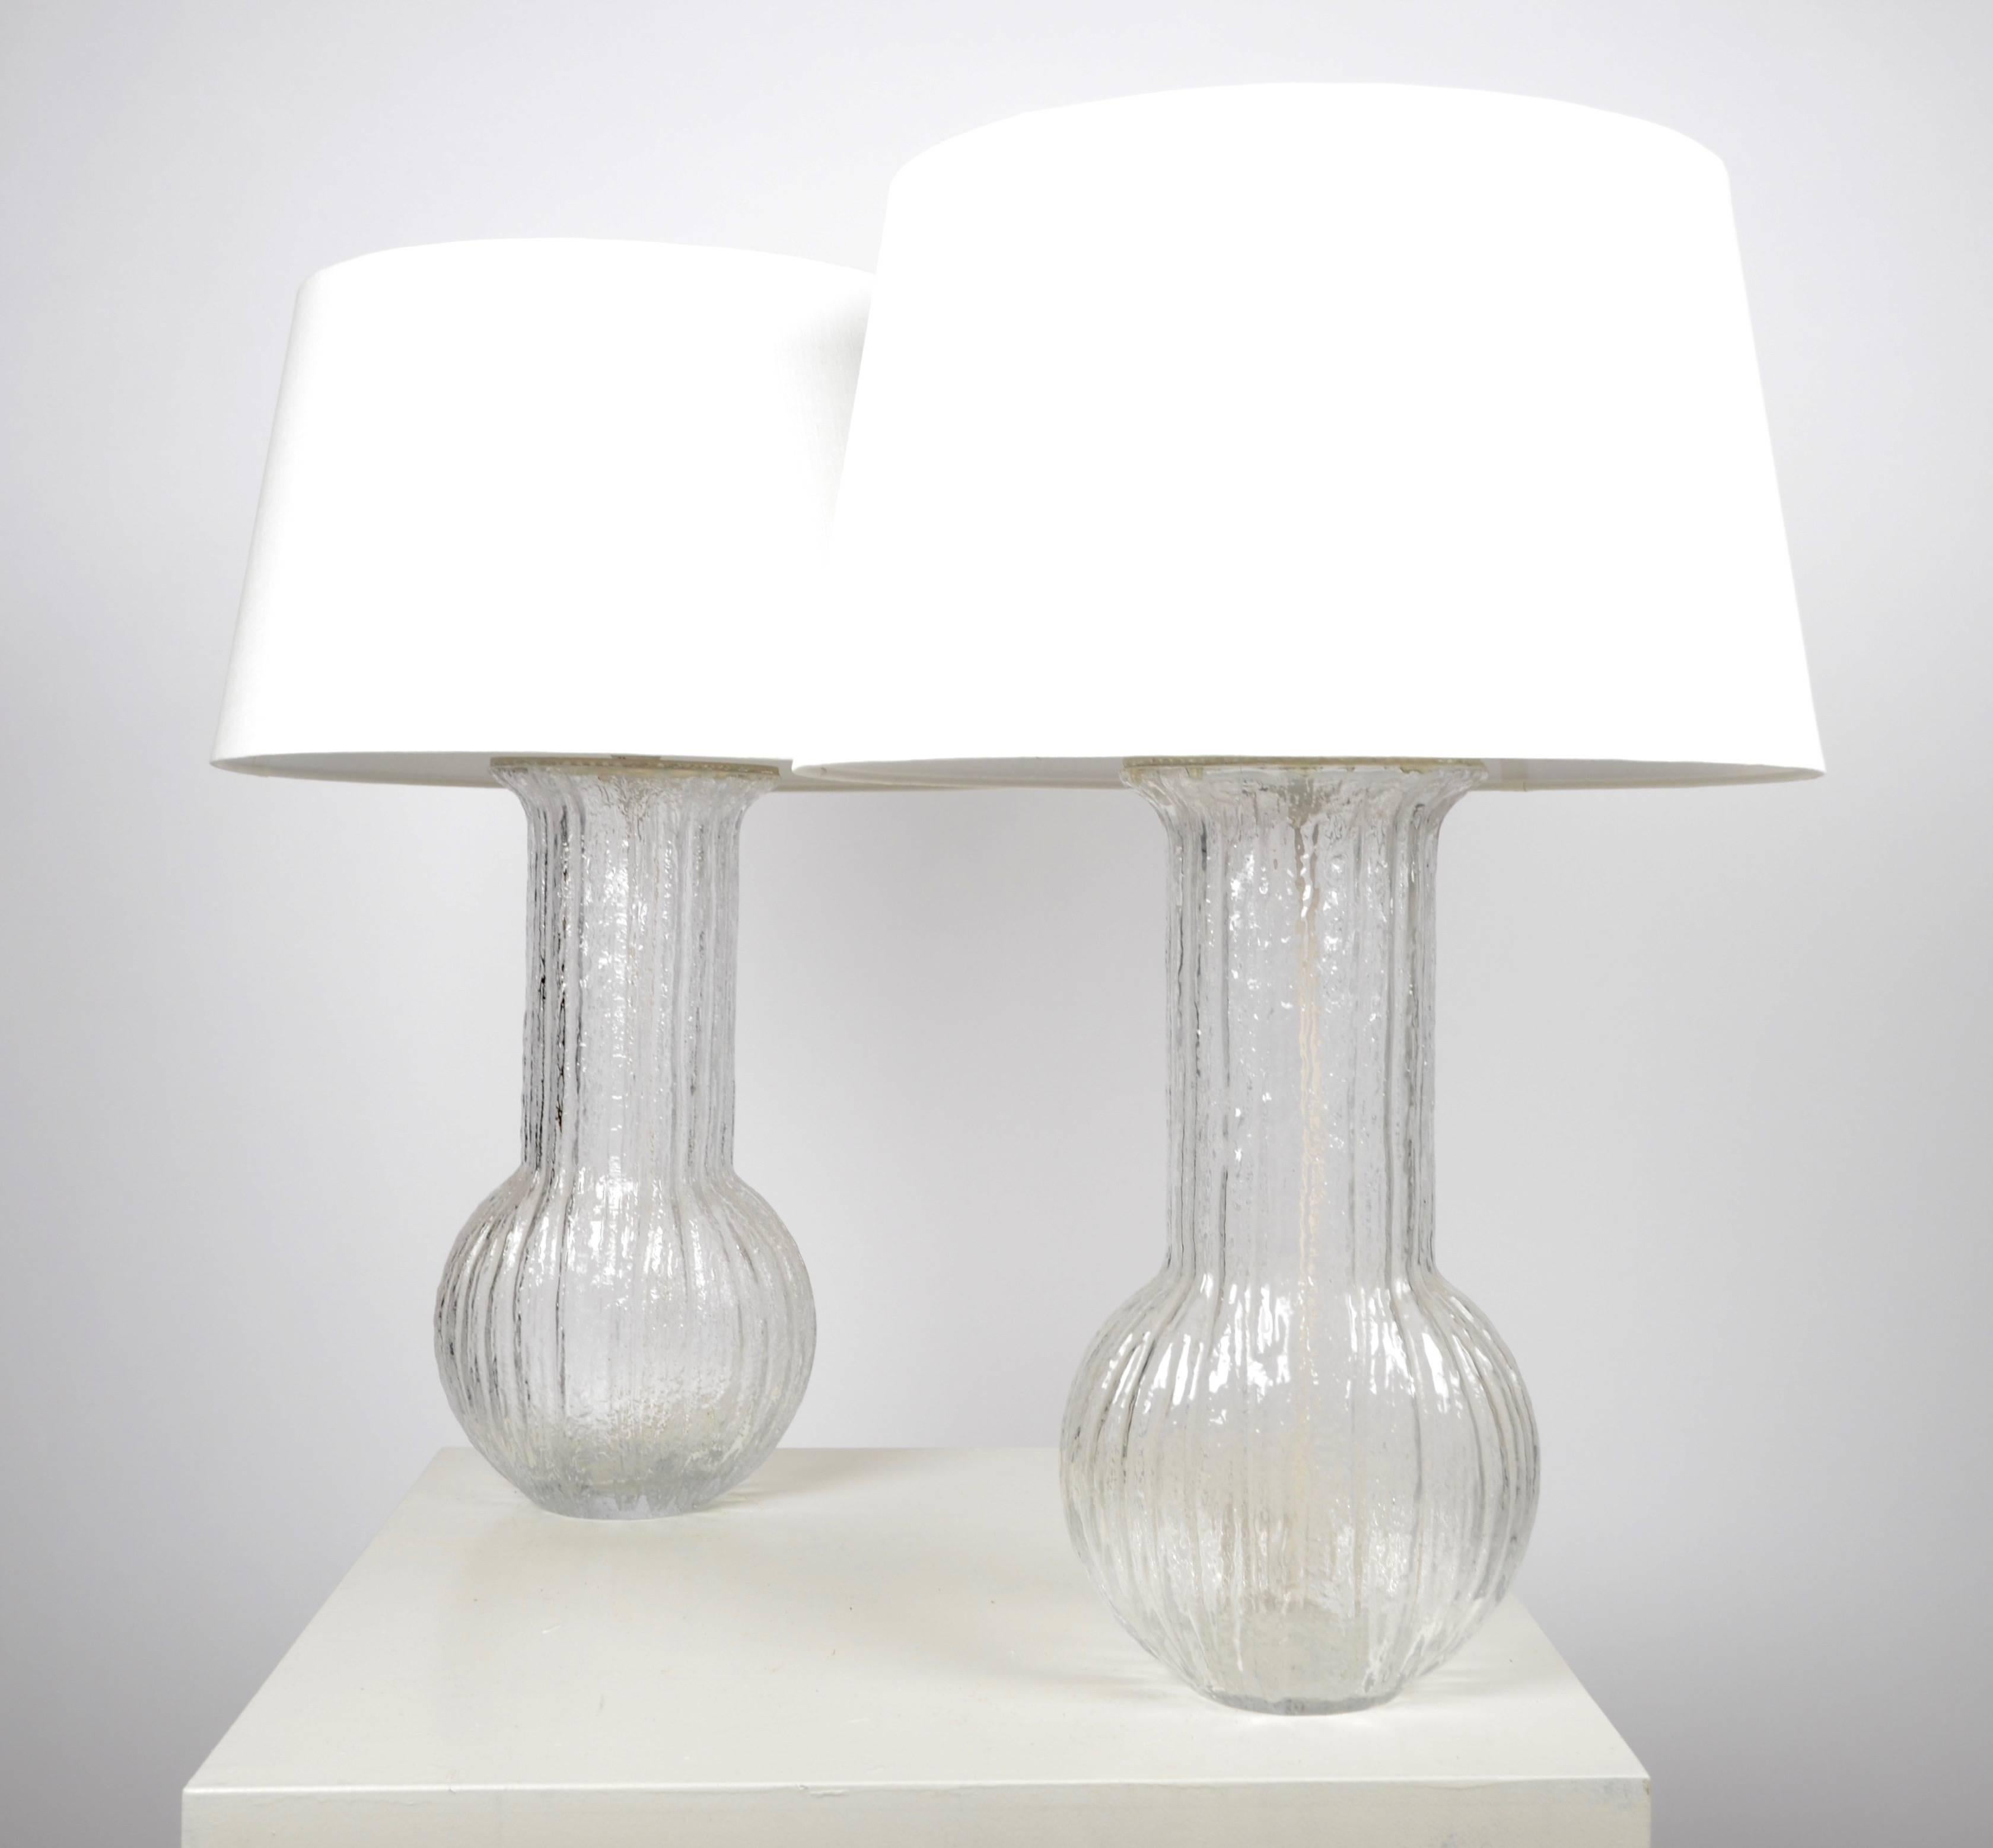 20th Century Timo Sarpaneva, a Pair of Table Lamps, Glass, 1960s-1970s